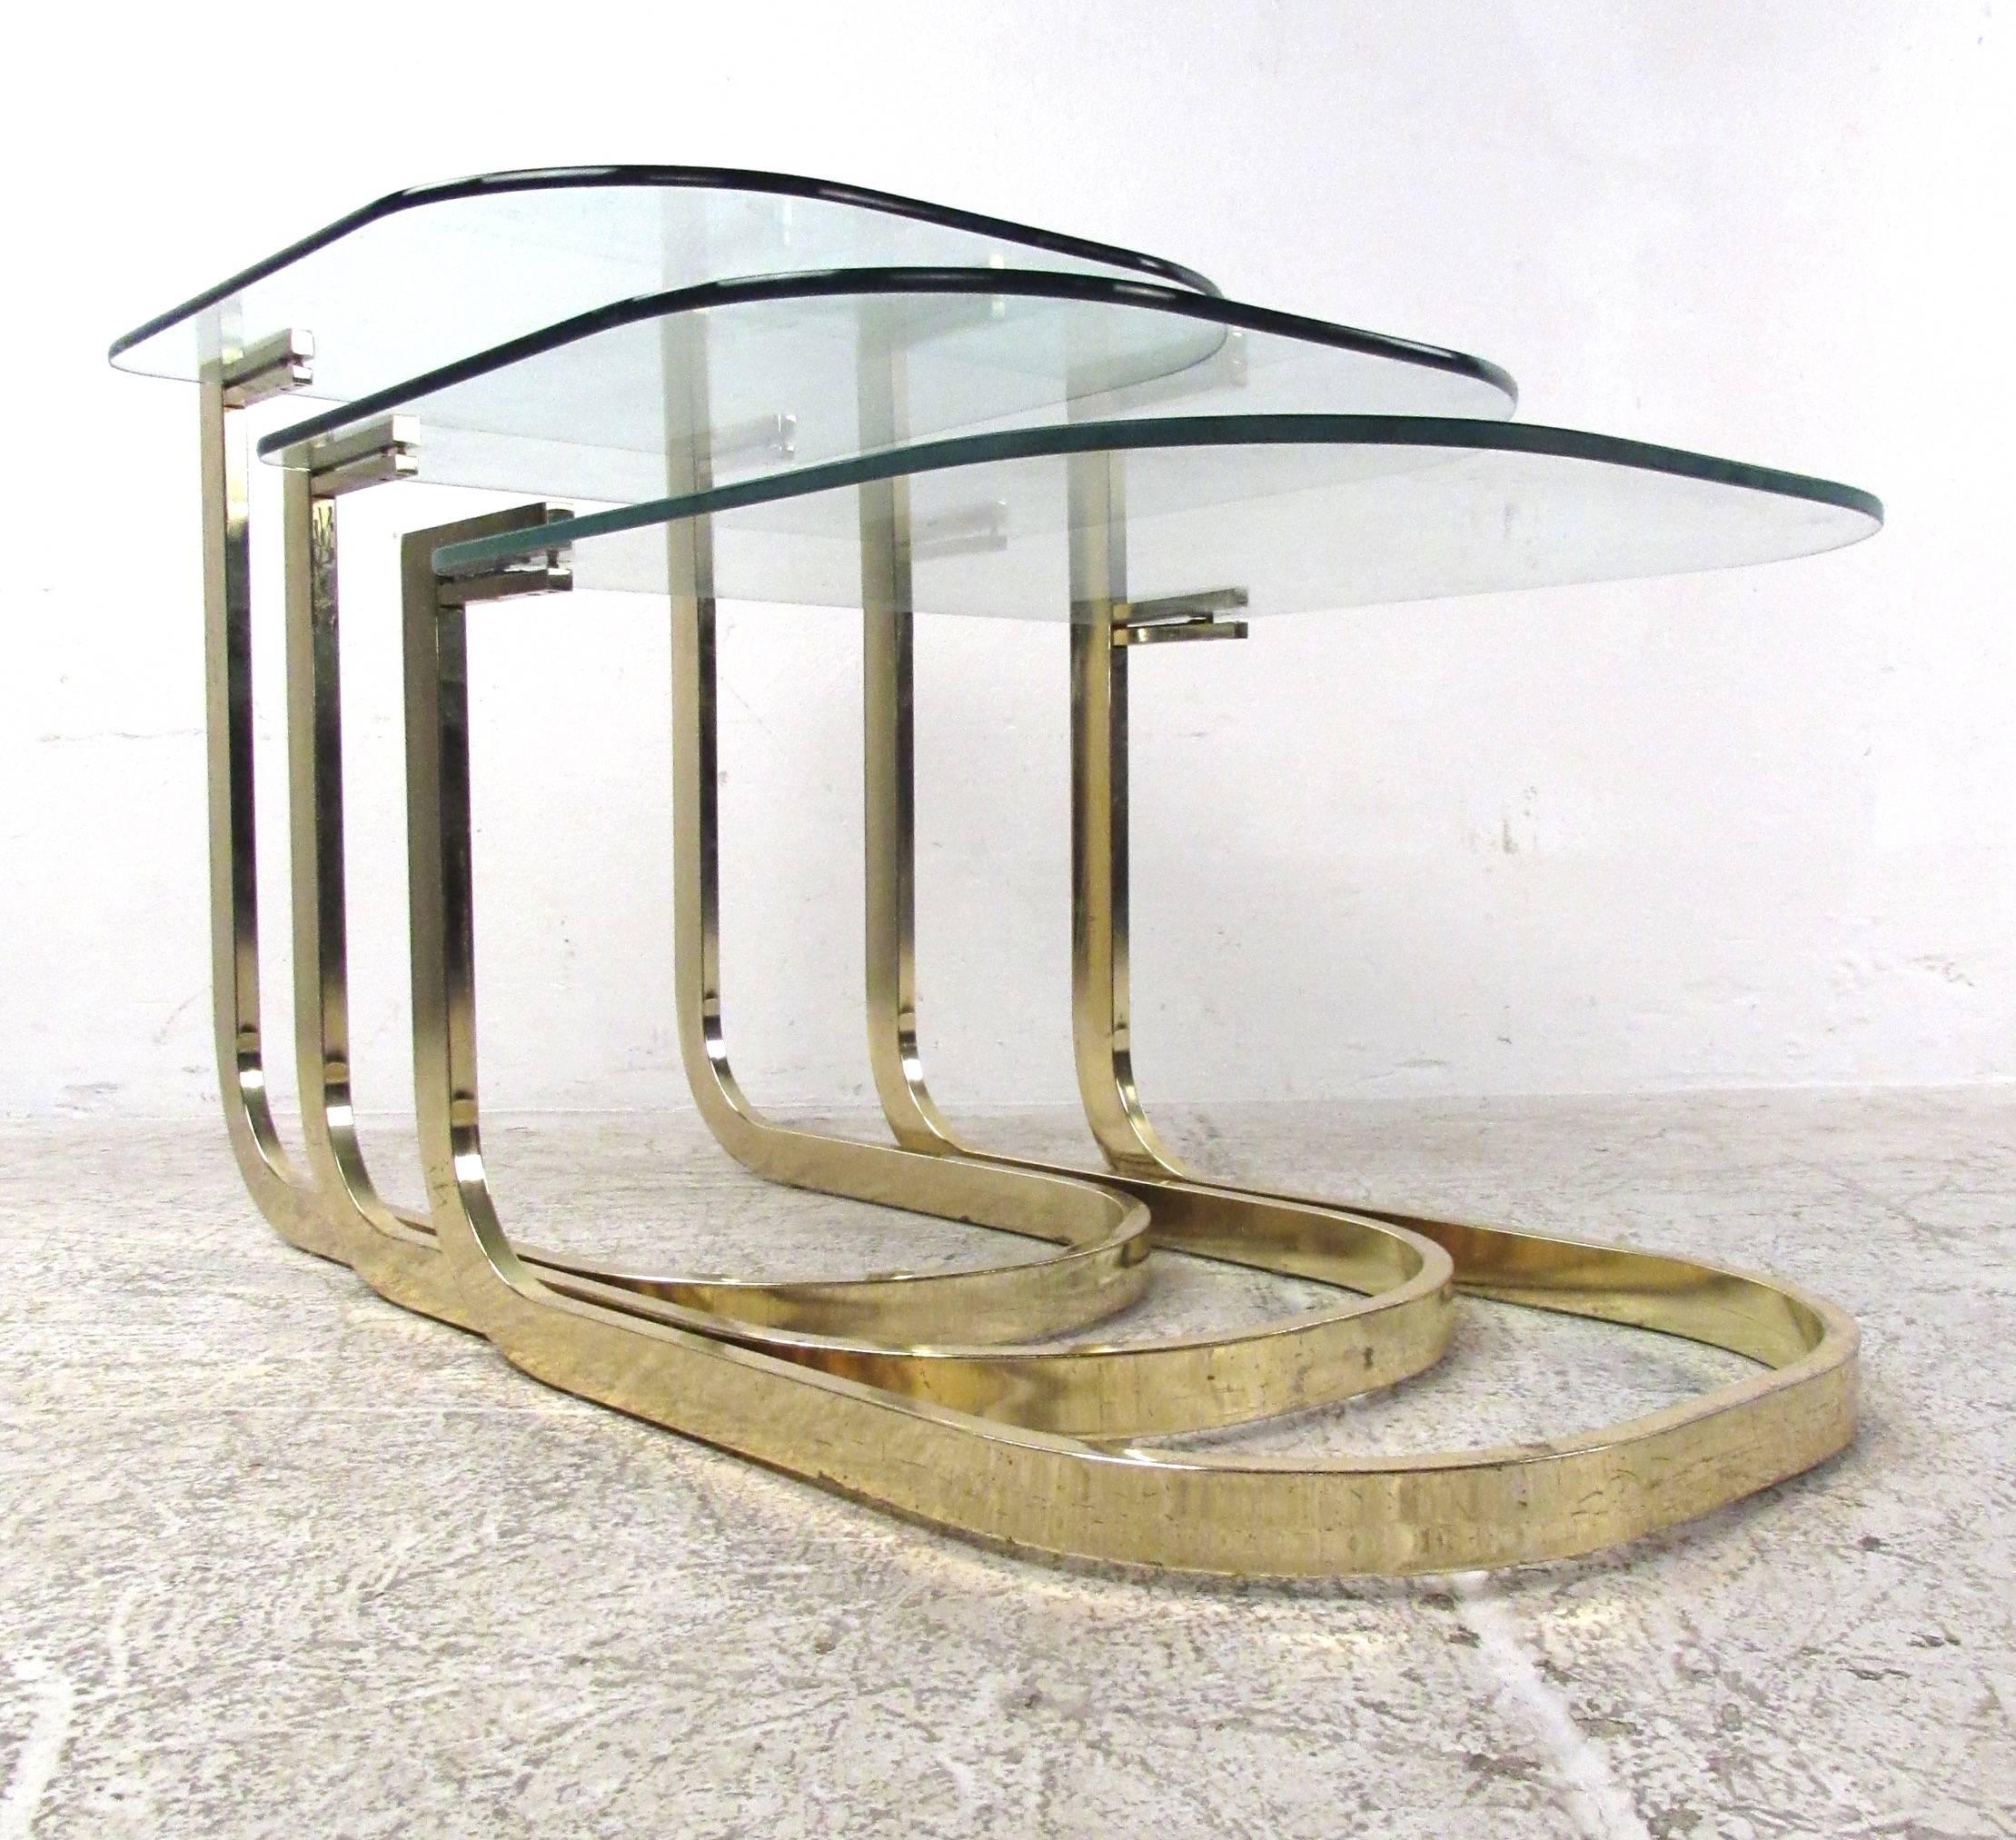 Set of three-flat bar nesting tables with glass tops by Design Institute America. A unique cantilever design that is sure to add style and grace to any modern interior. Please confirm item location (NY or NJ) with dealer.

H 22.25 in. x W 20 in. x D